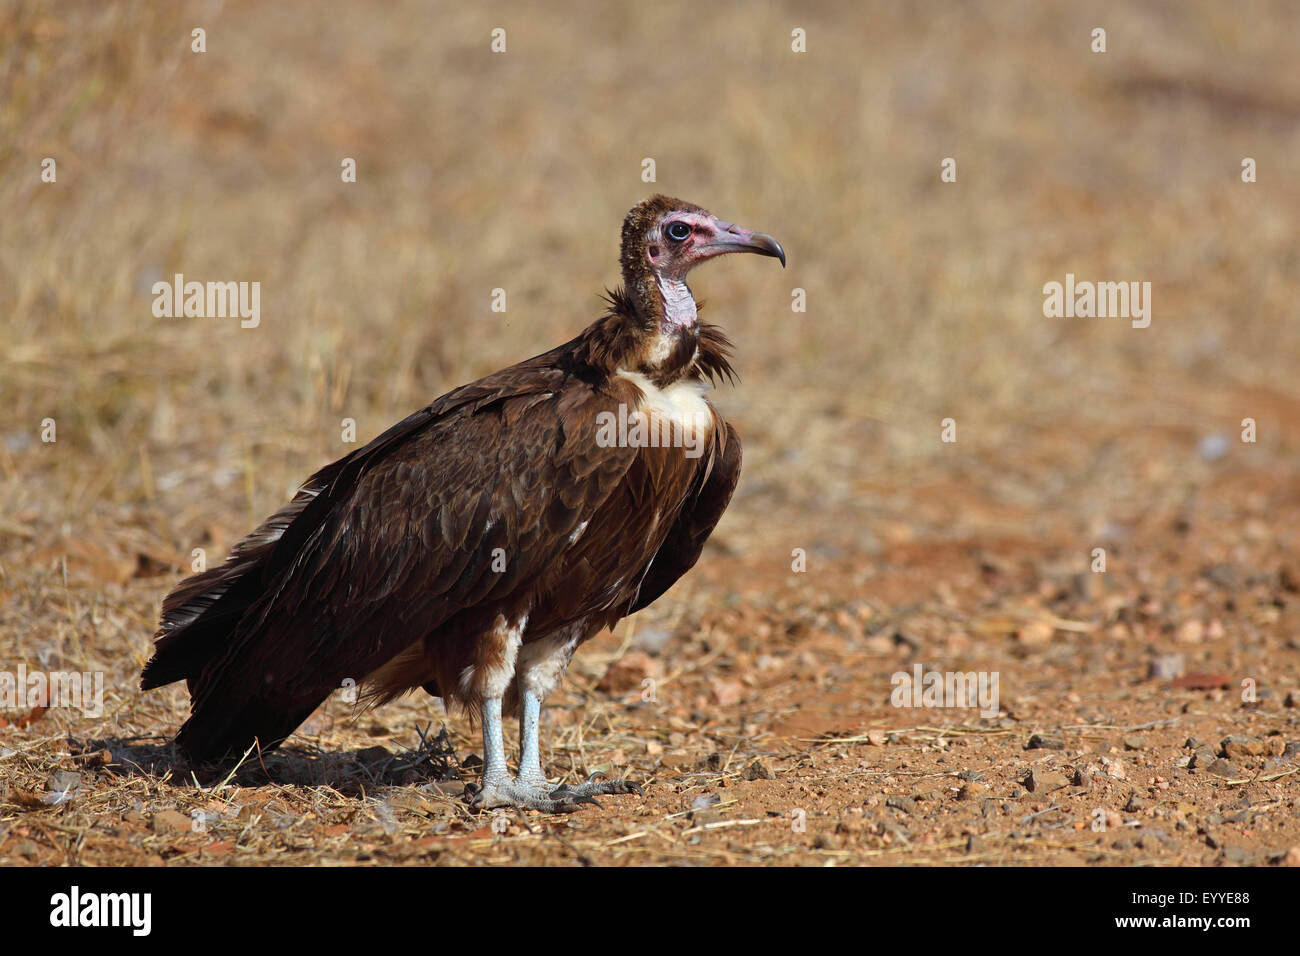 hooded vulture (Necrosyrtes monachus), standing on the ground, South Africa, Krueger National Park Stock Photo